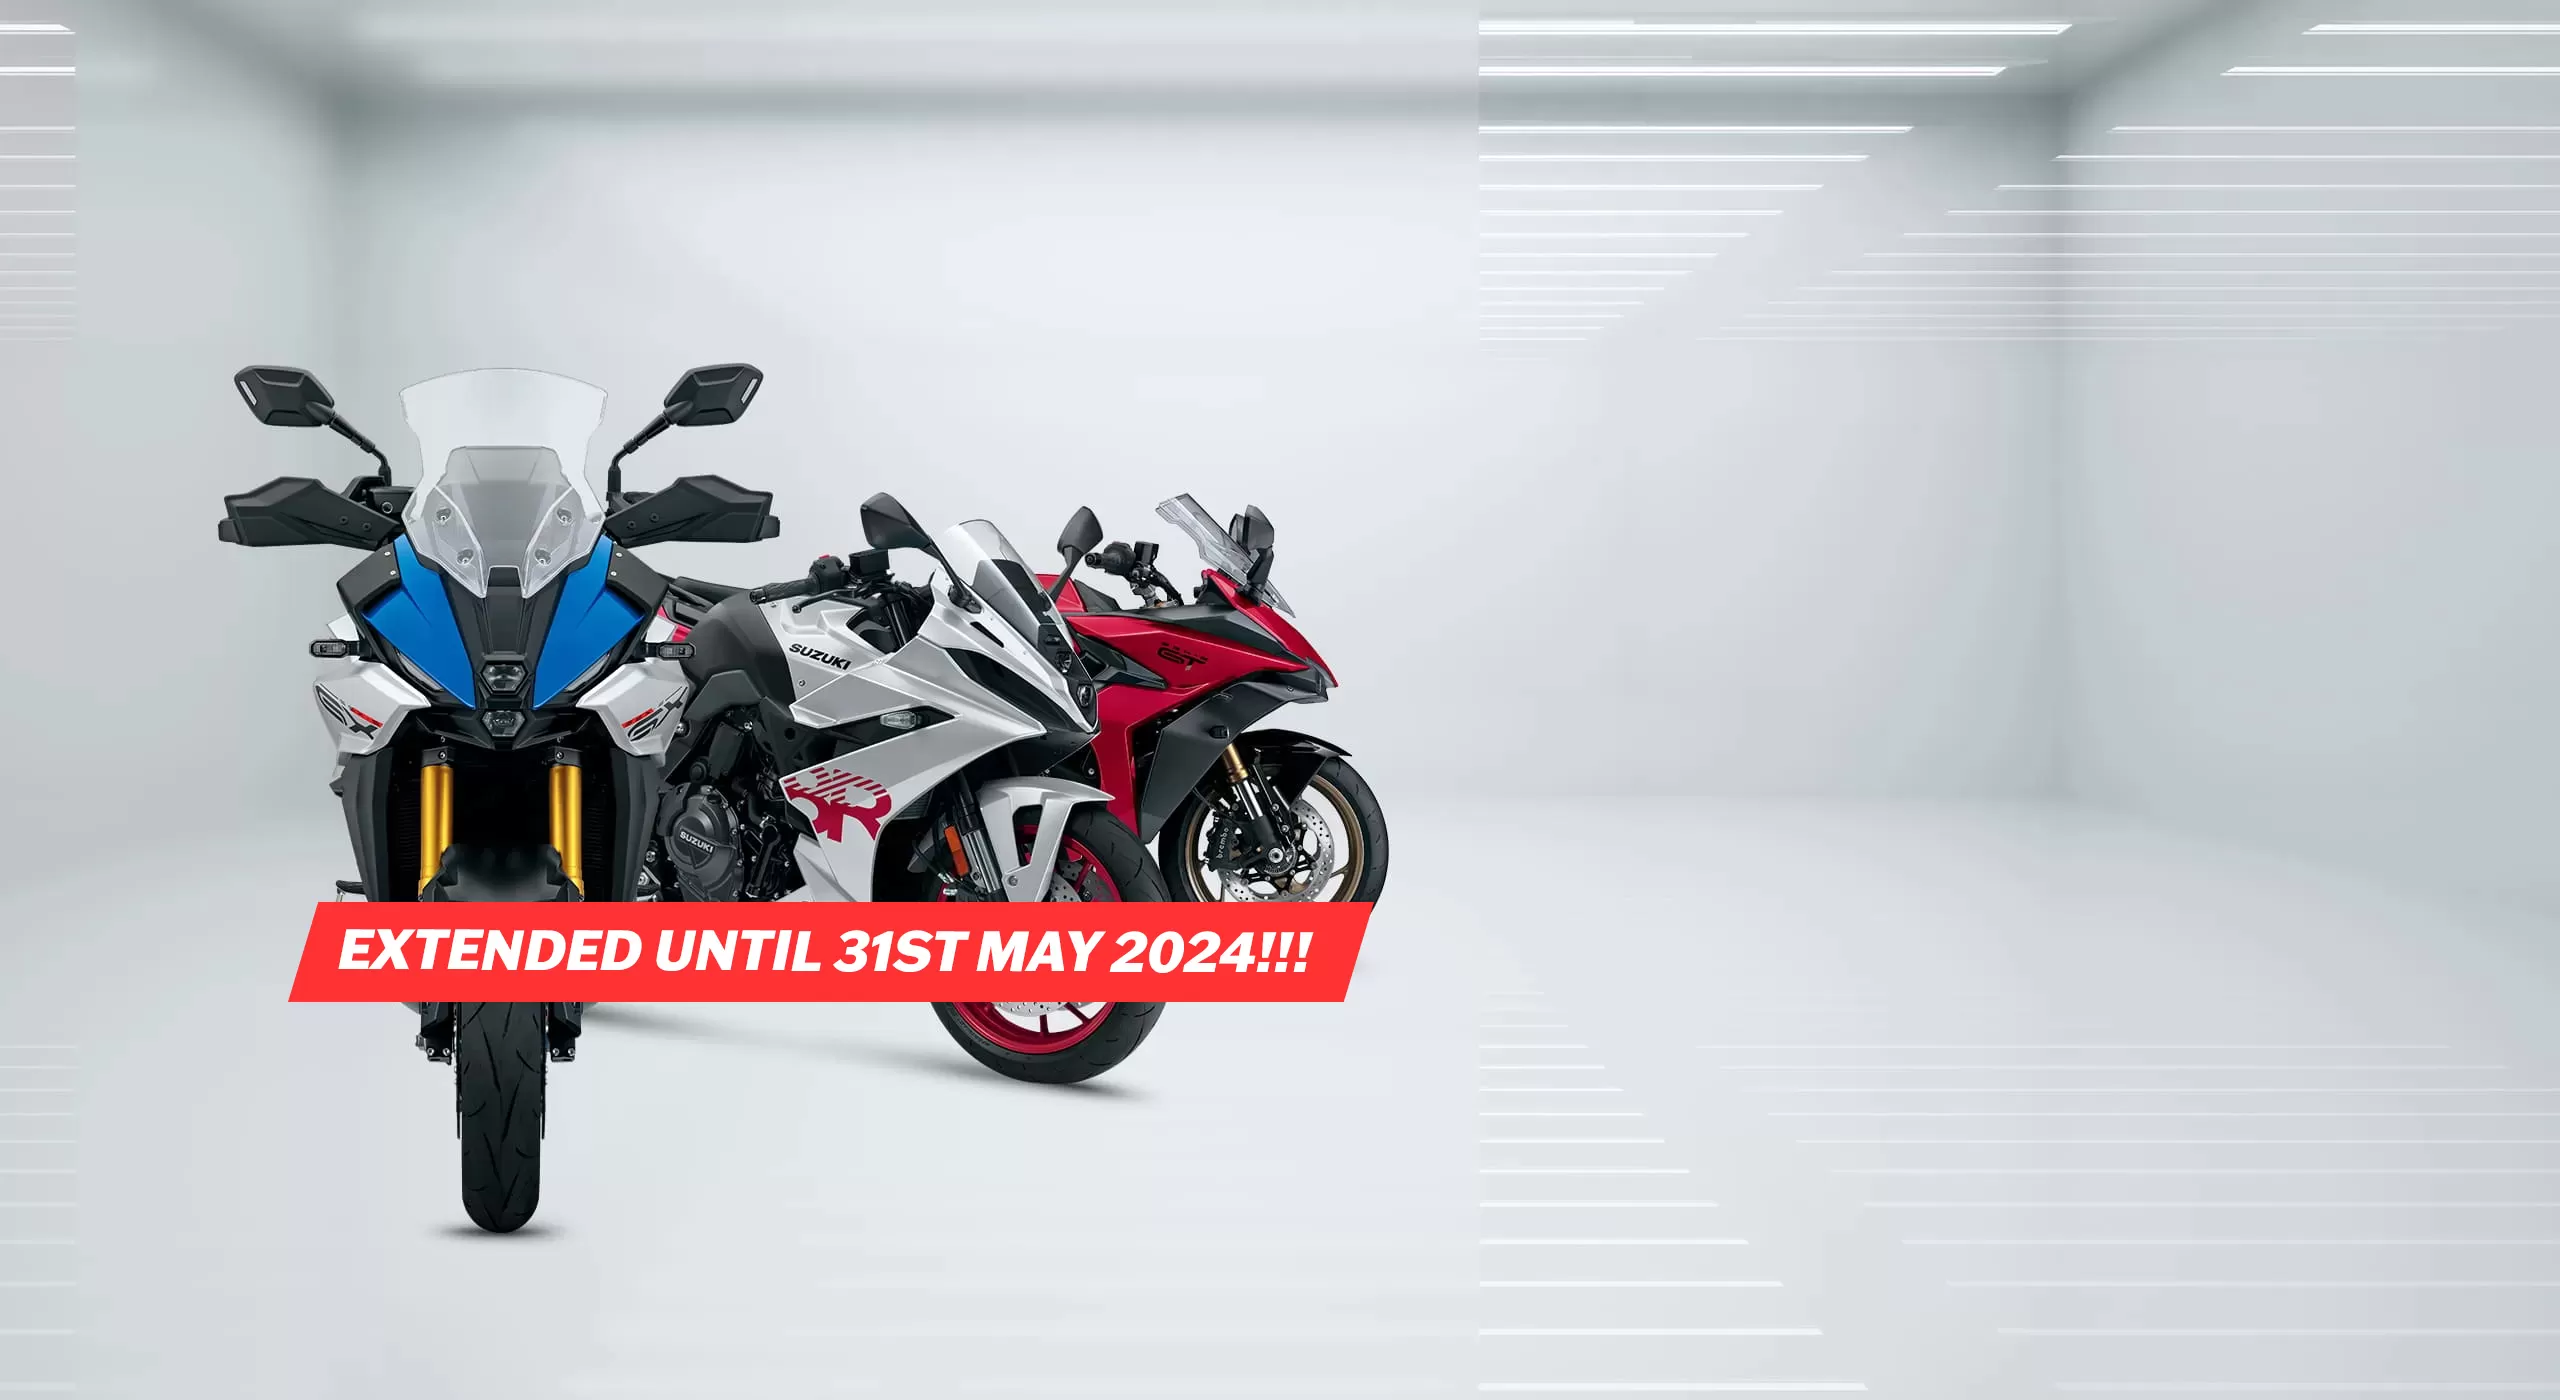 Exclusive Suzuki Spring Offer. Purchase a new Suzuki and get your first 3 services free at Frasers Motorcycles